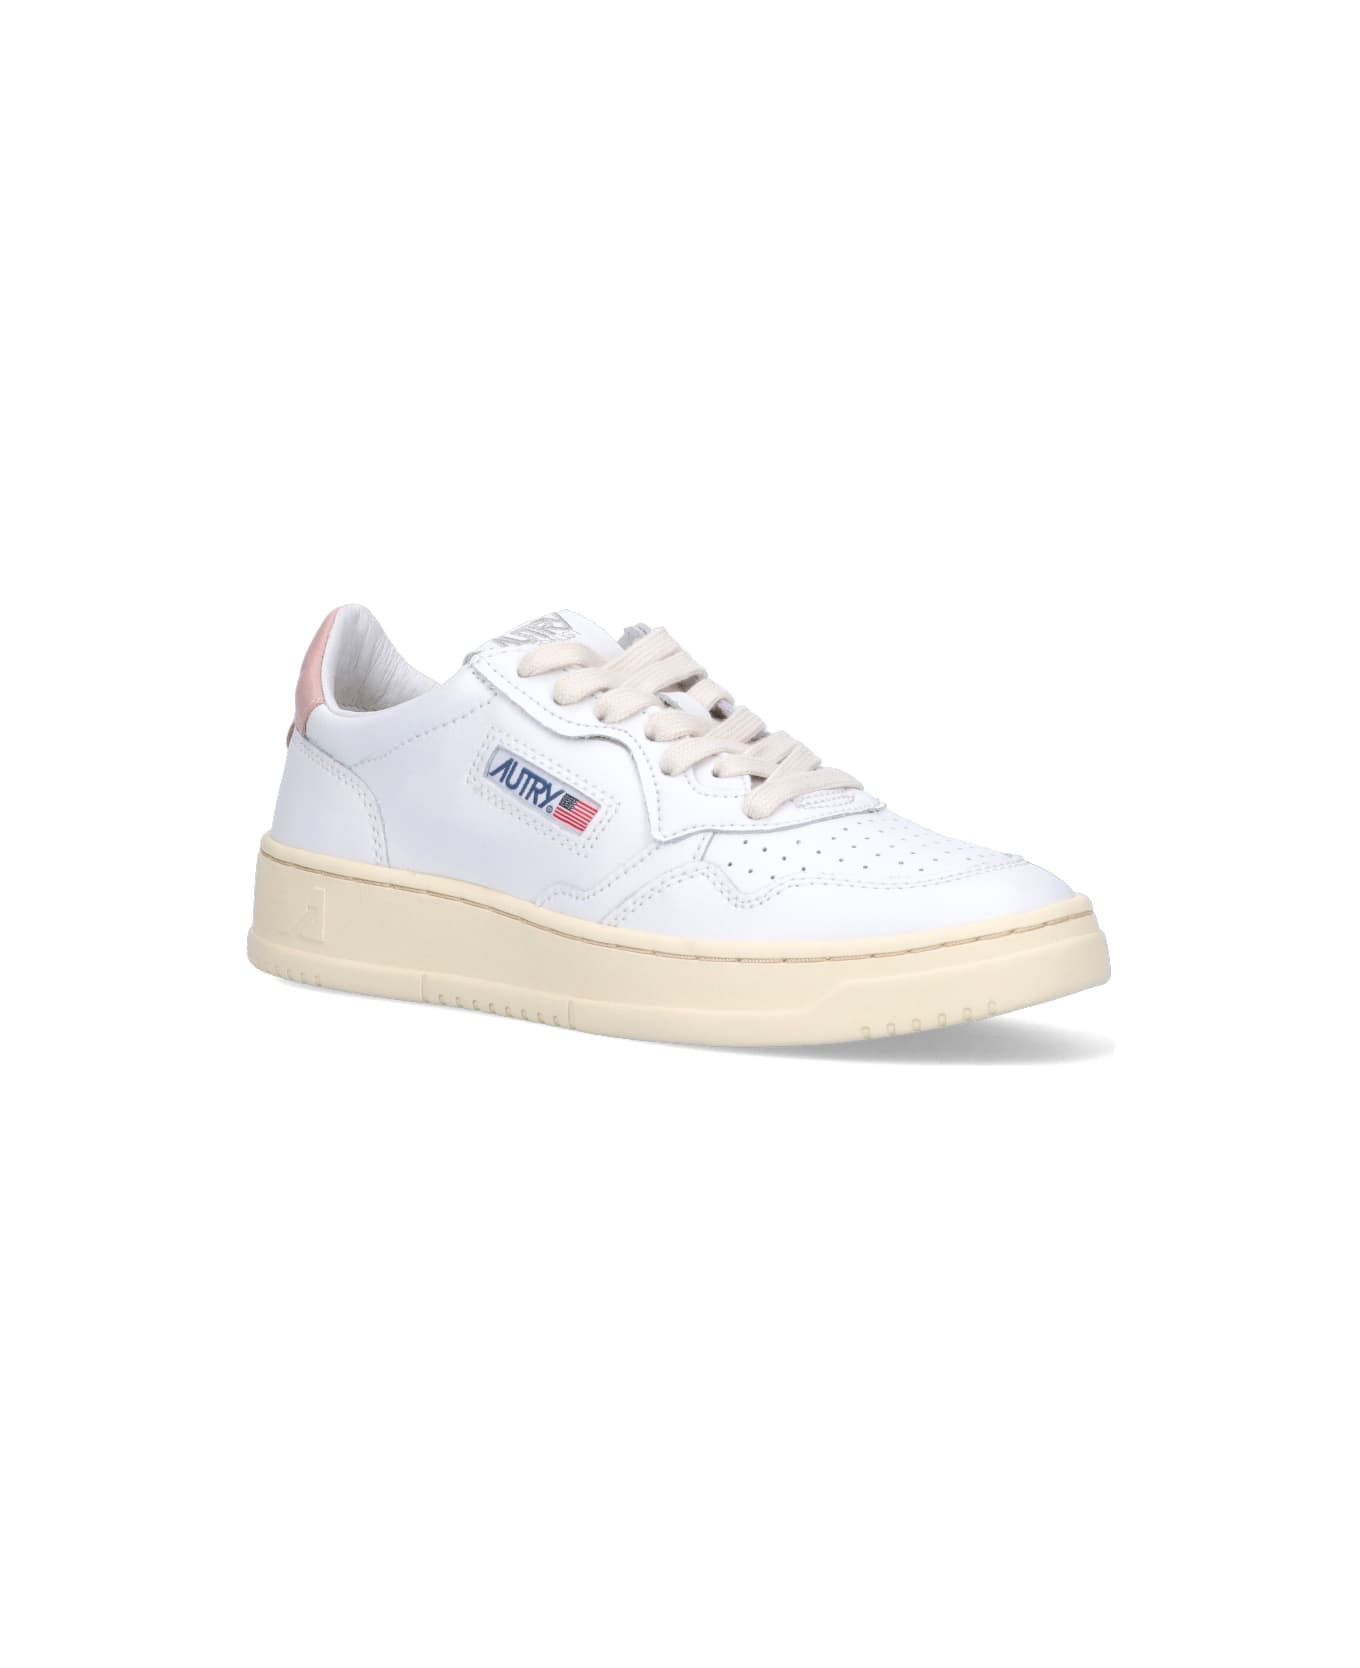 Autry 'medalist 01' Low Sneakers - Wht/pink